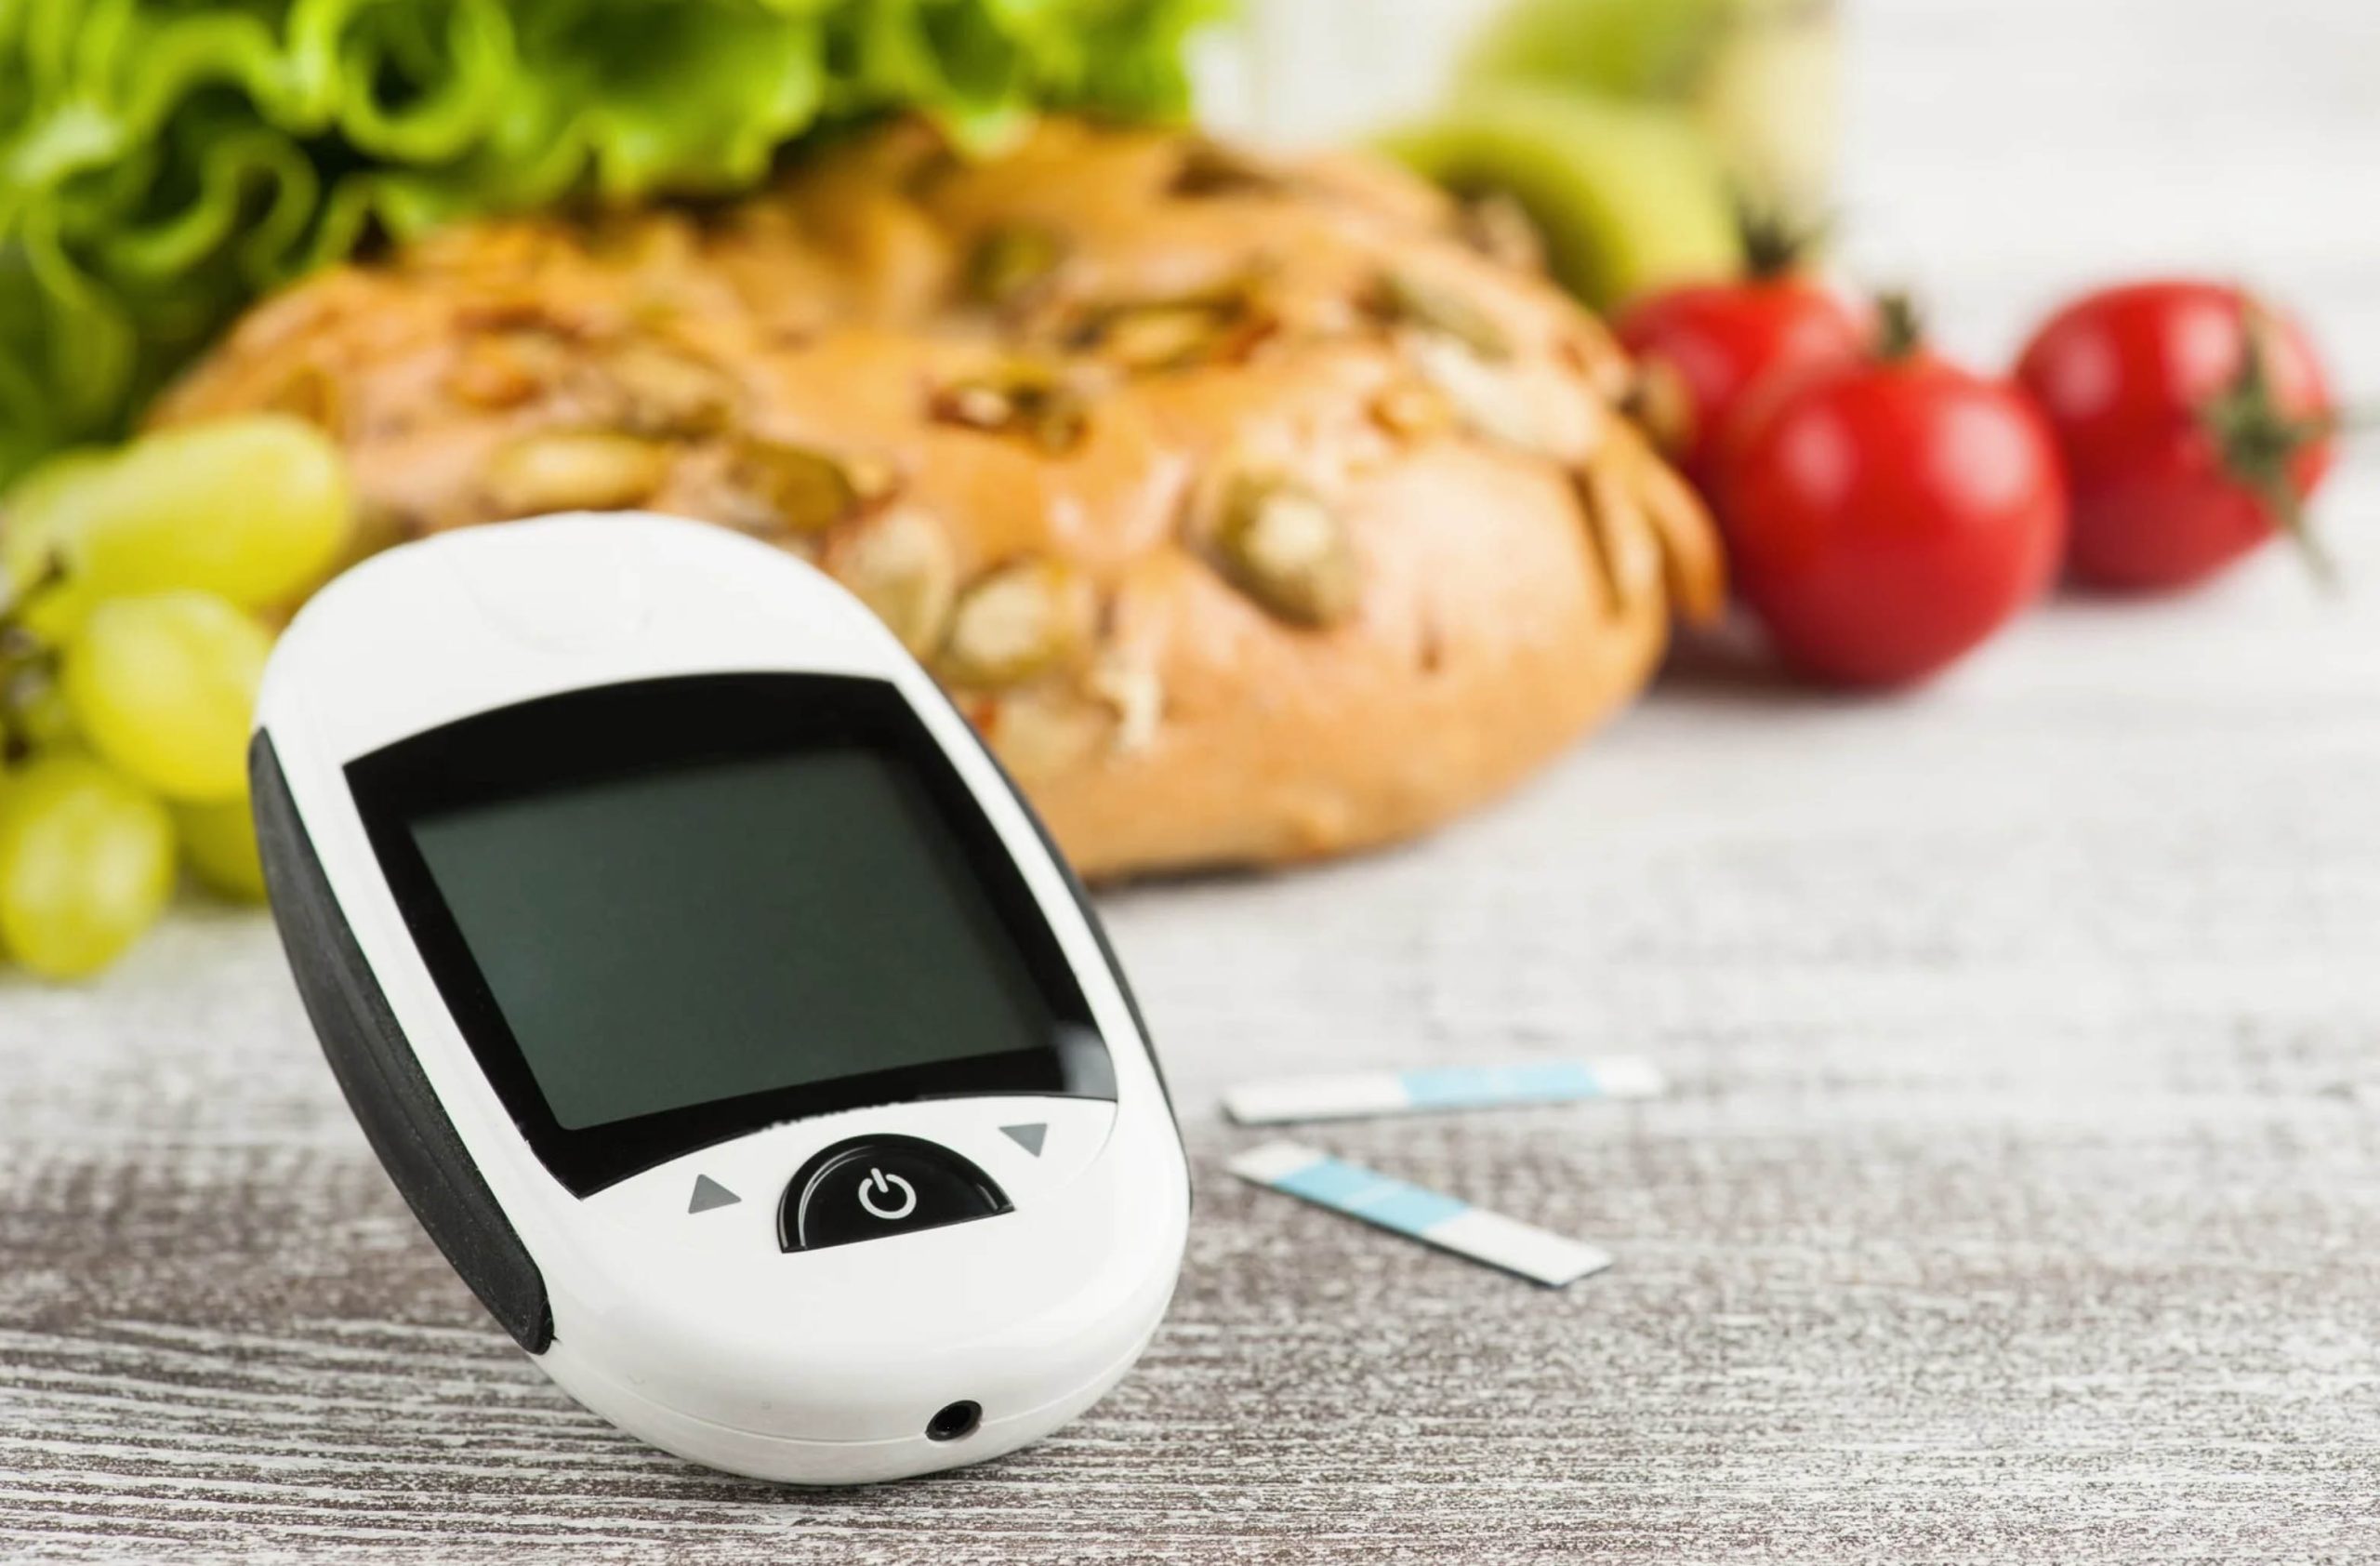 ACGrace - A digital glucose monitor next to fruits and vegetables.